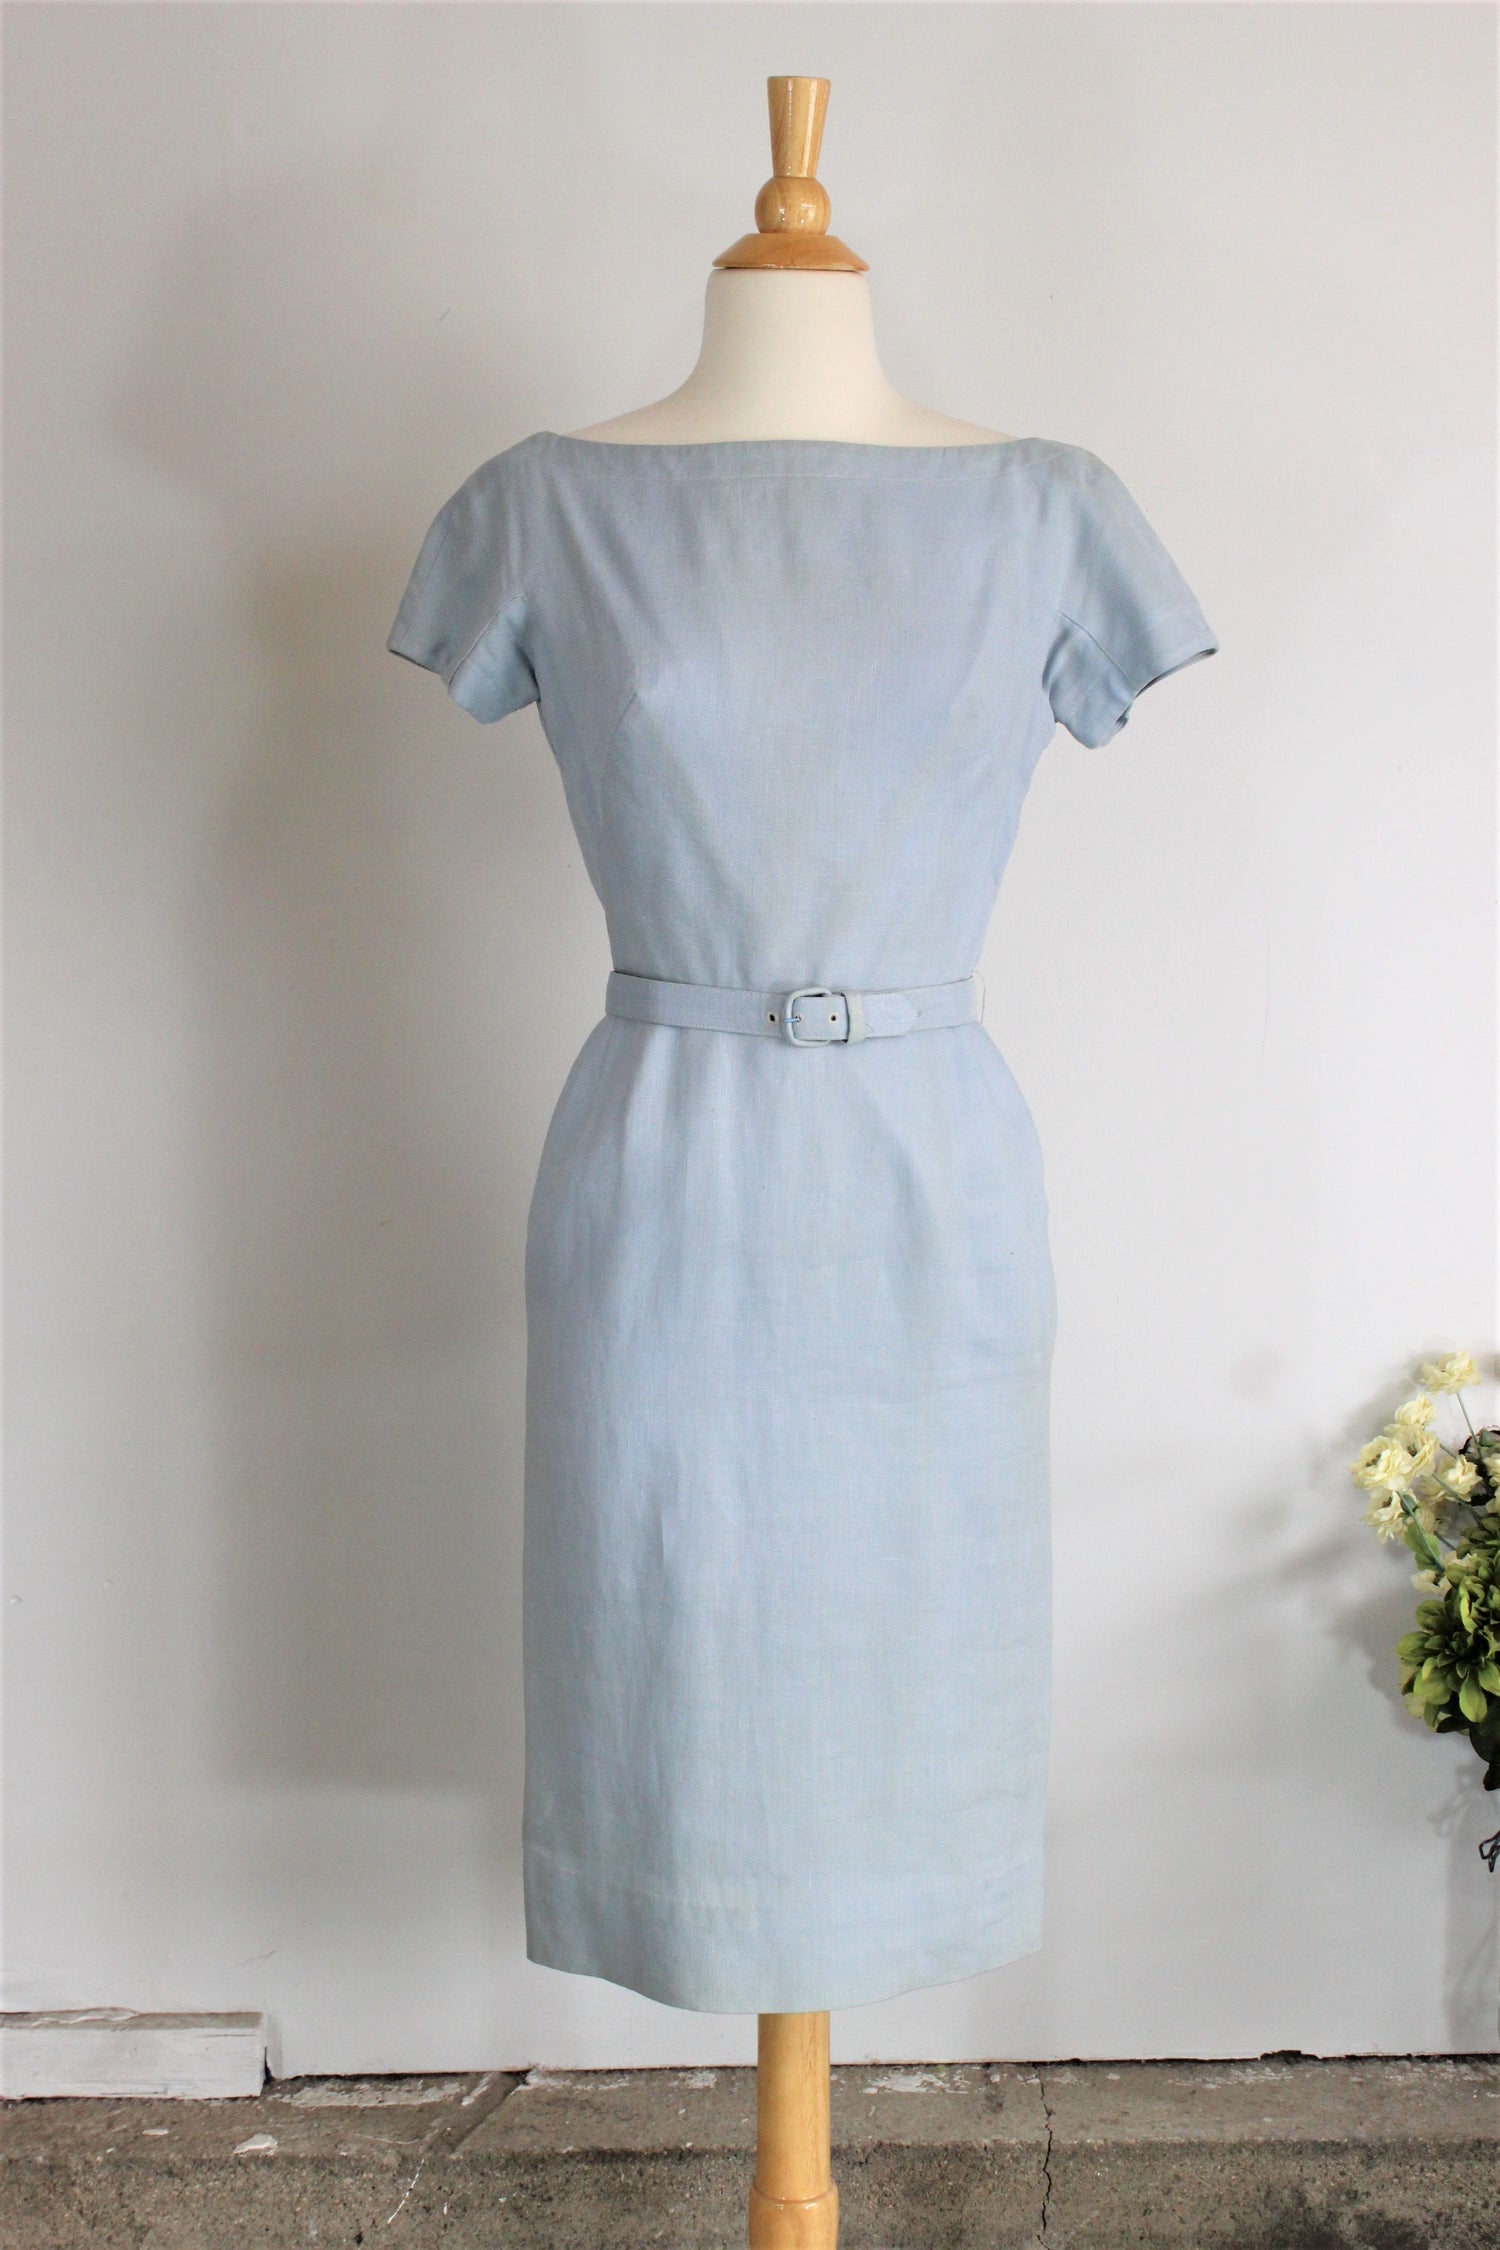 Vintage 1950s Wiggle Dress With Pockets And Belt in Pale Blue Linen